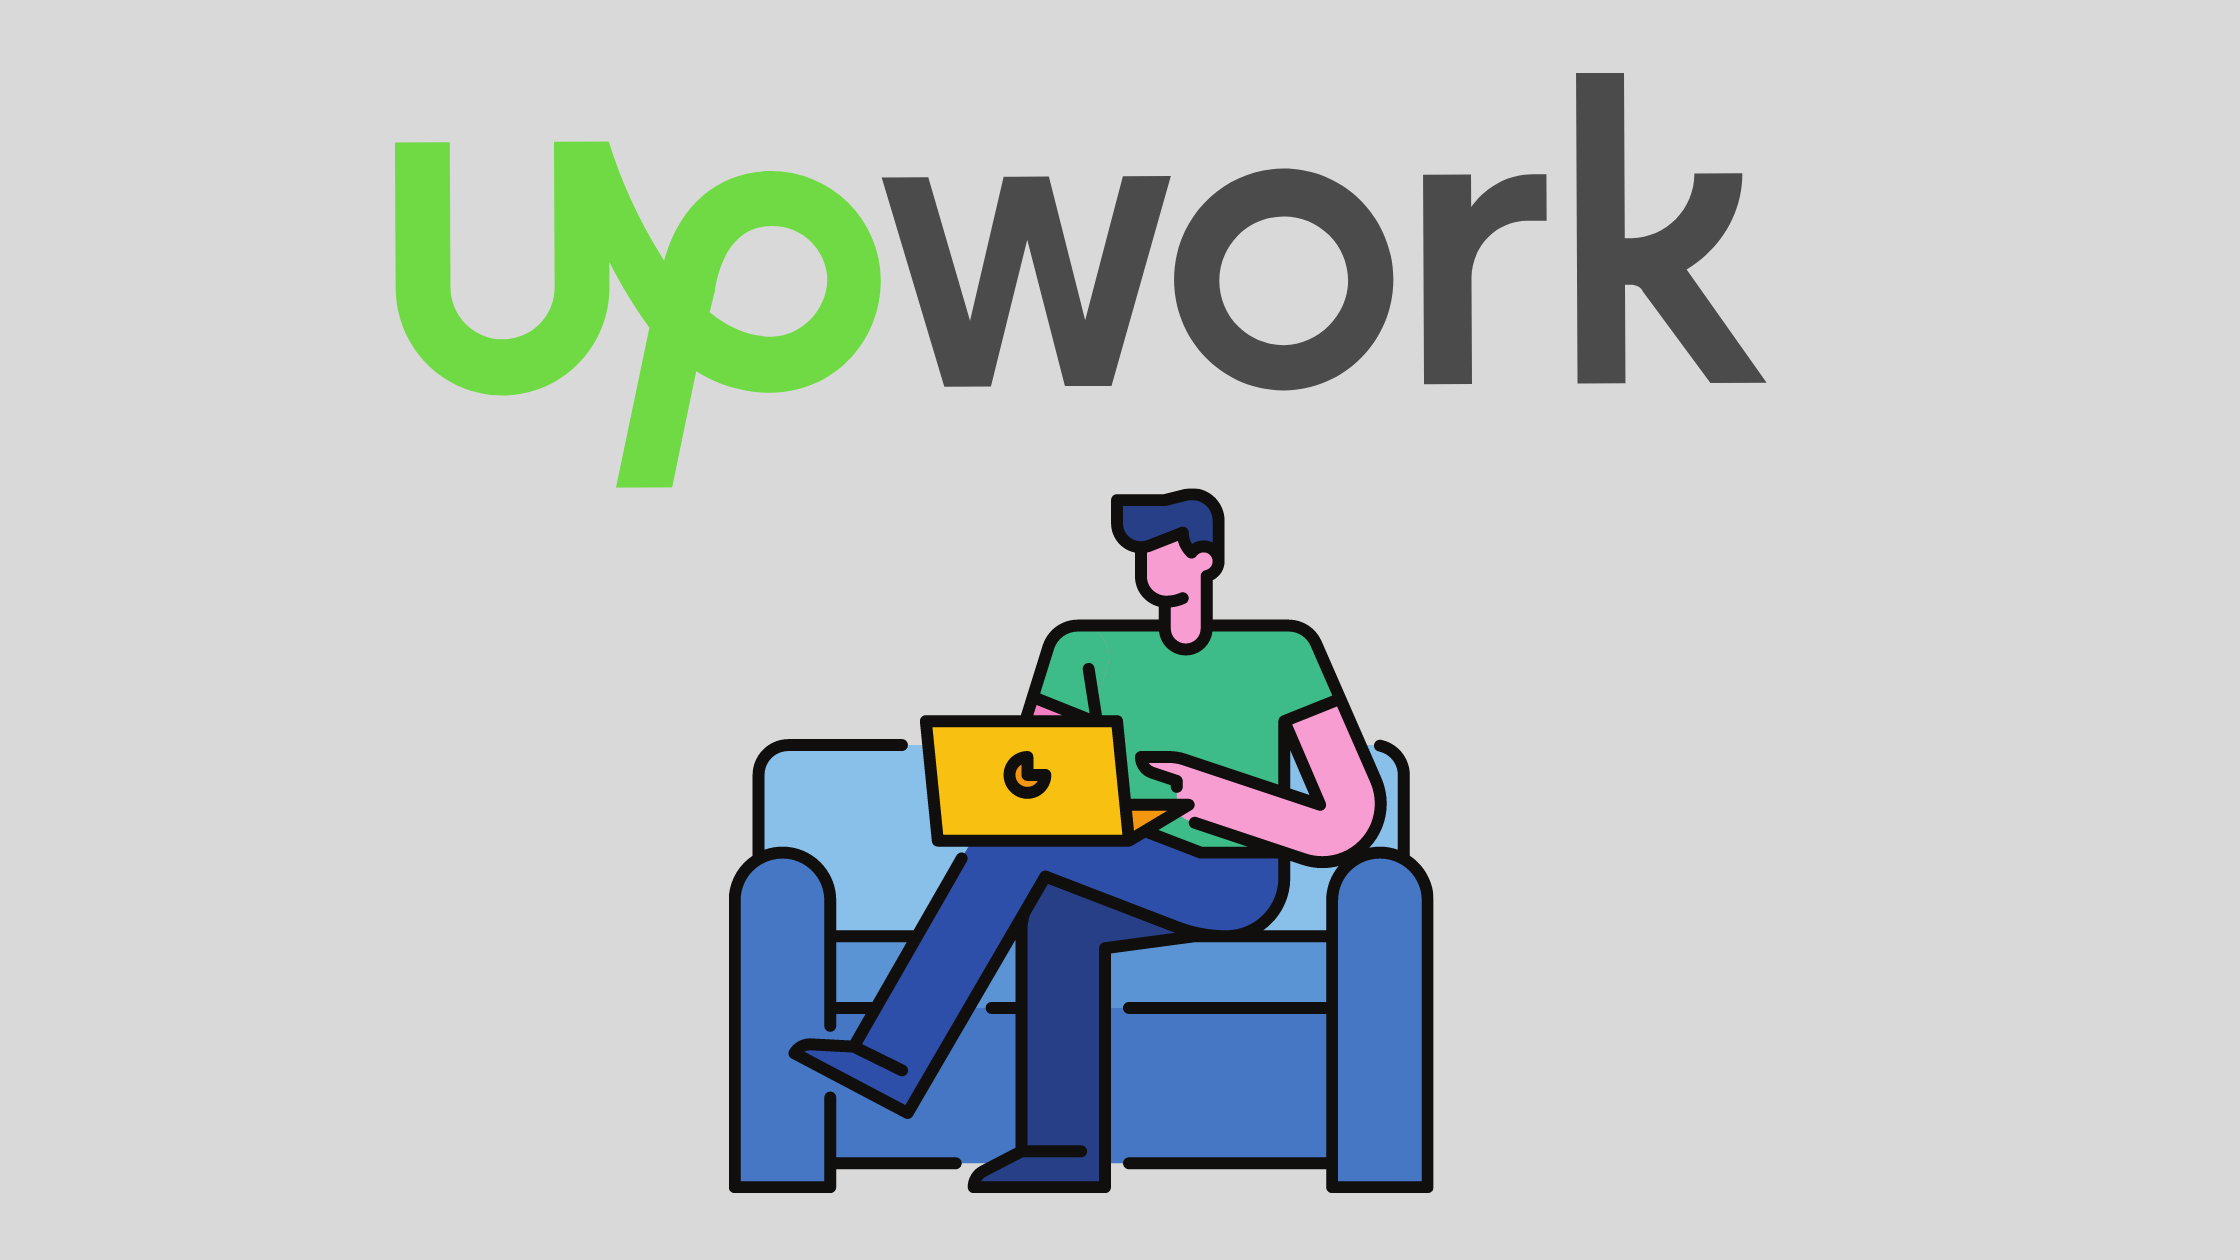 Pros and Cons of Upwork